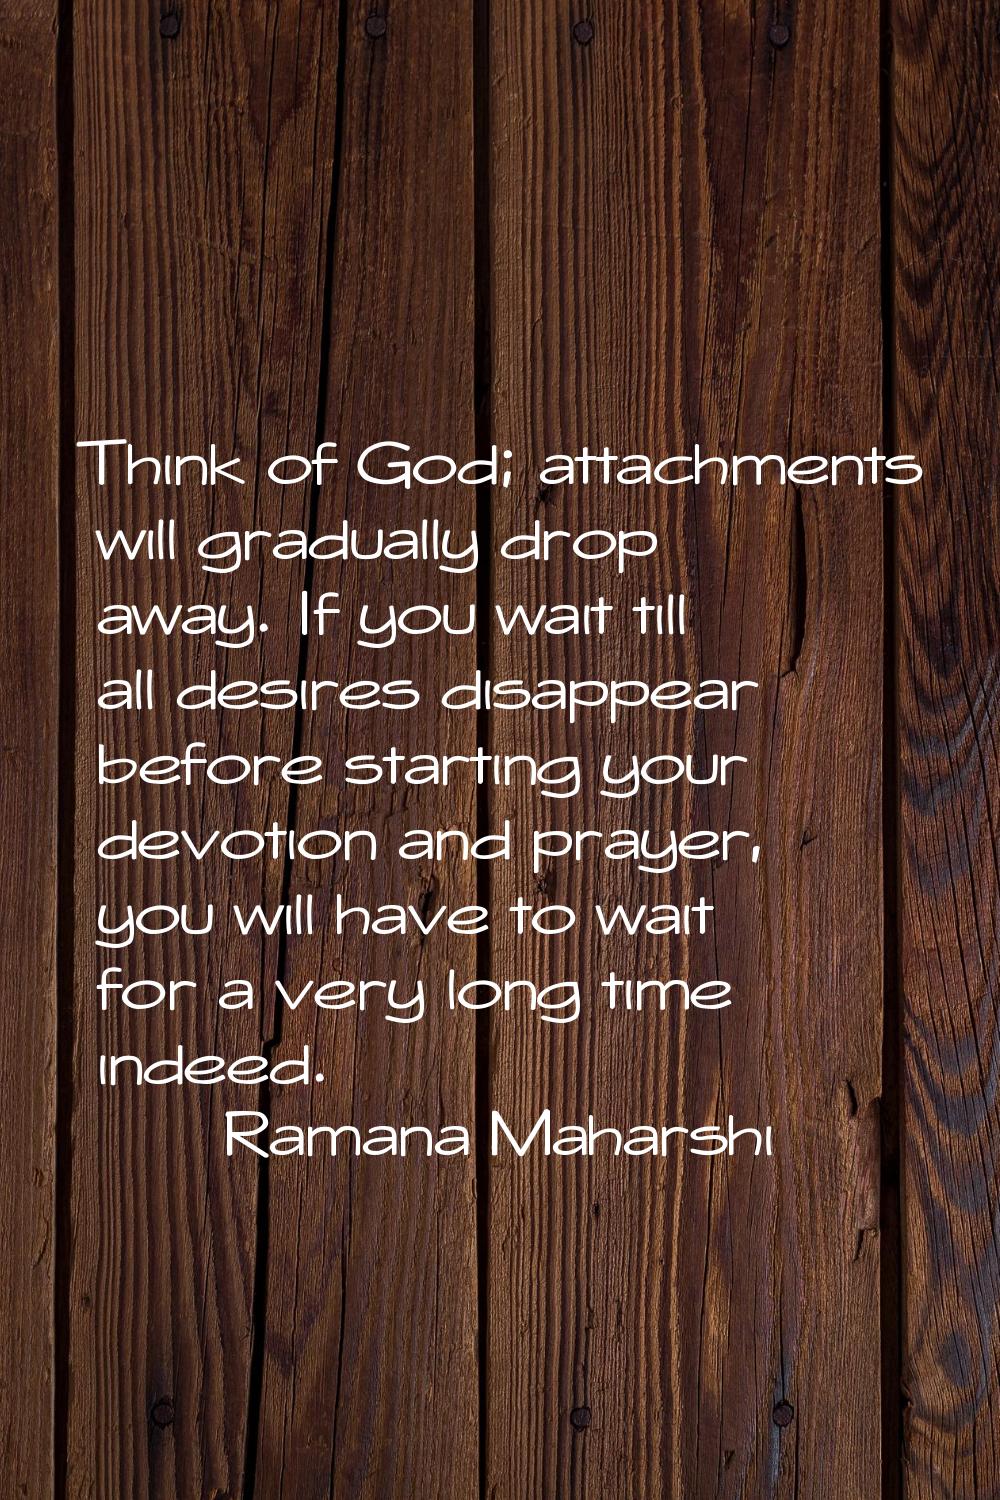 Think of God; attachments will gradually drop away. If you wait till all desires disappear before s